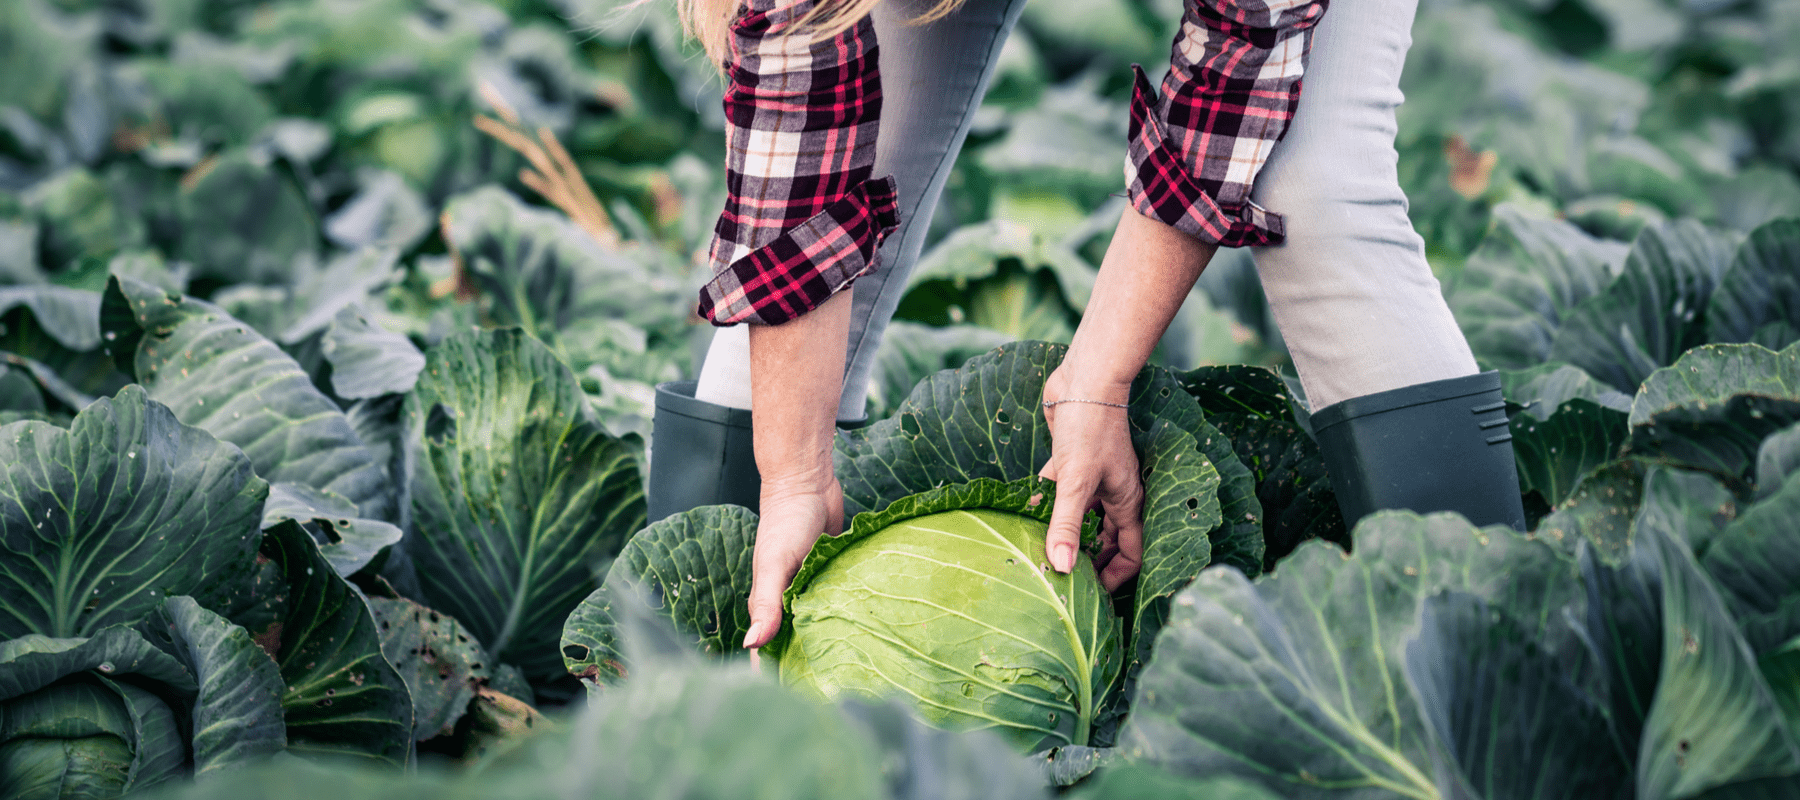 Woman harvesting cabbage